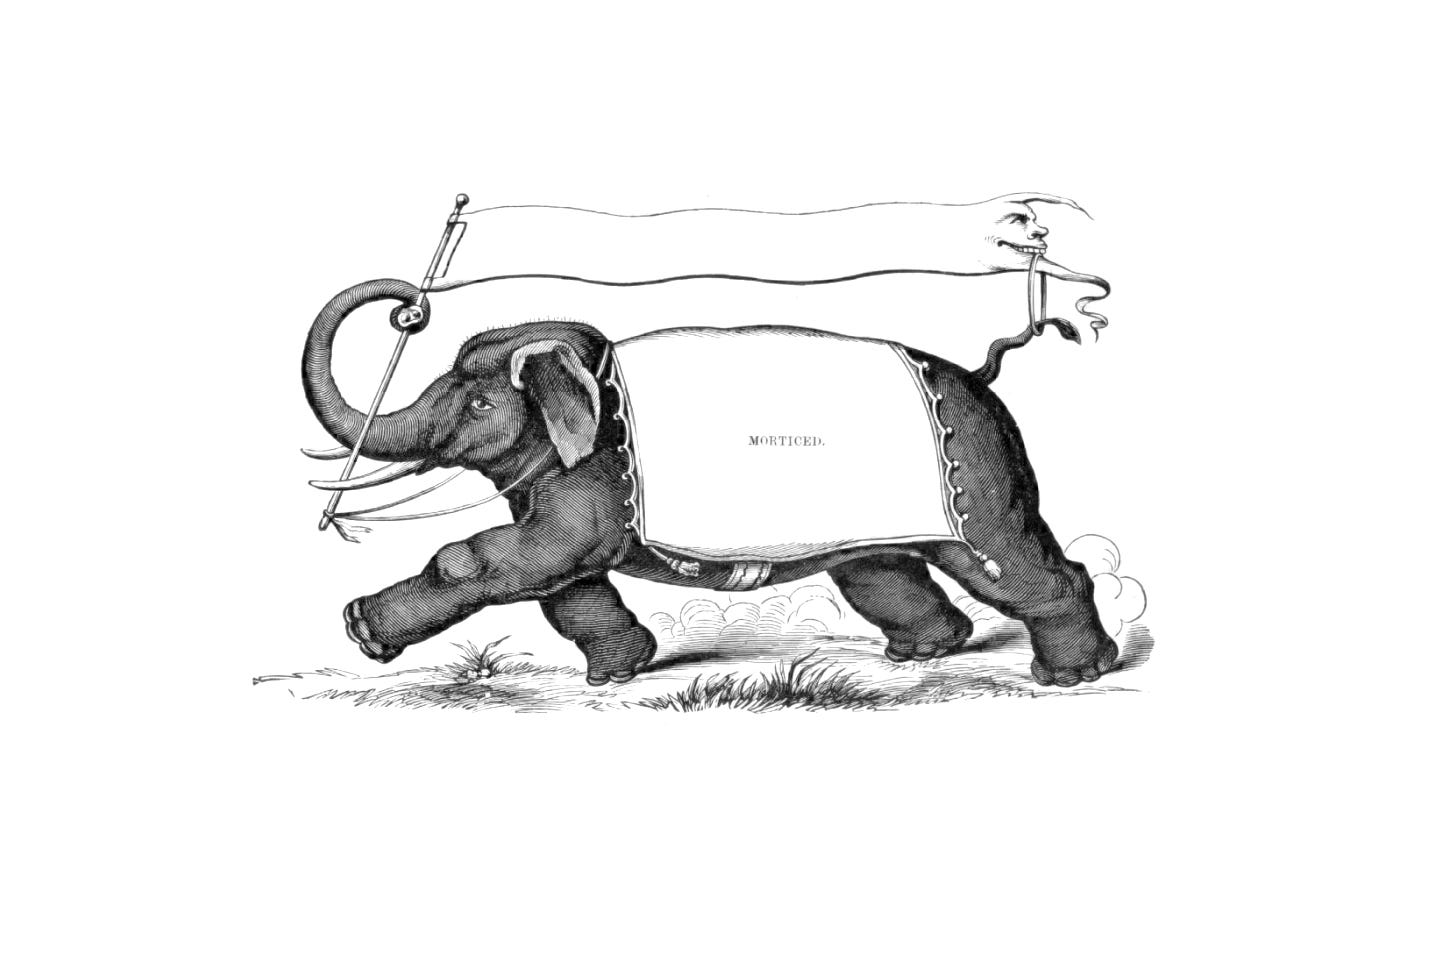 An Elephant Carrying a Banner with a Jester's Face Looped Through a Ring Stuck on the Elephant's Tail - it's a confusing image.